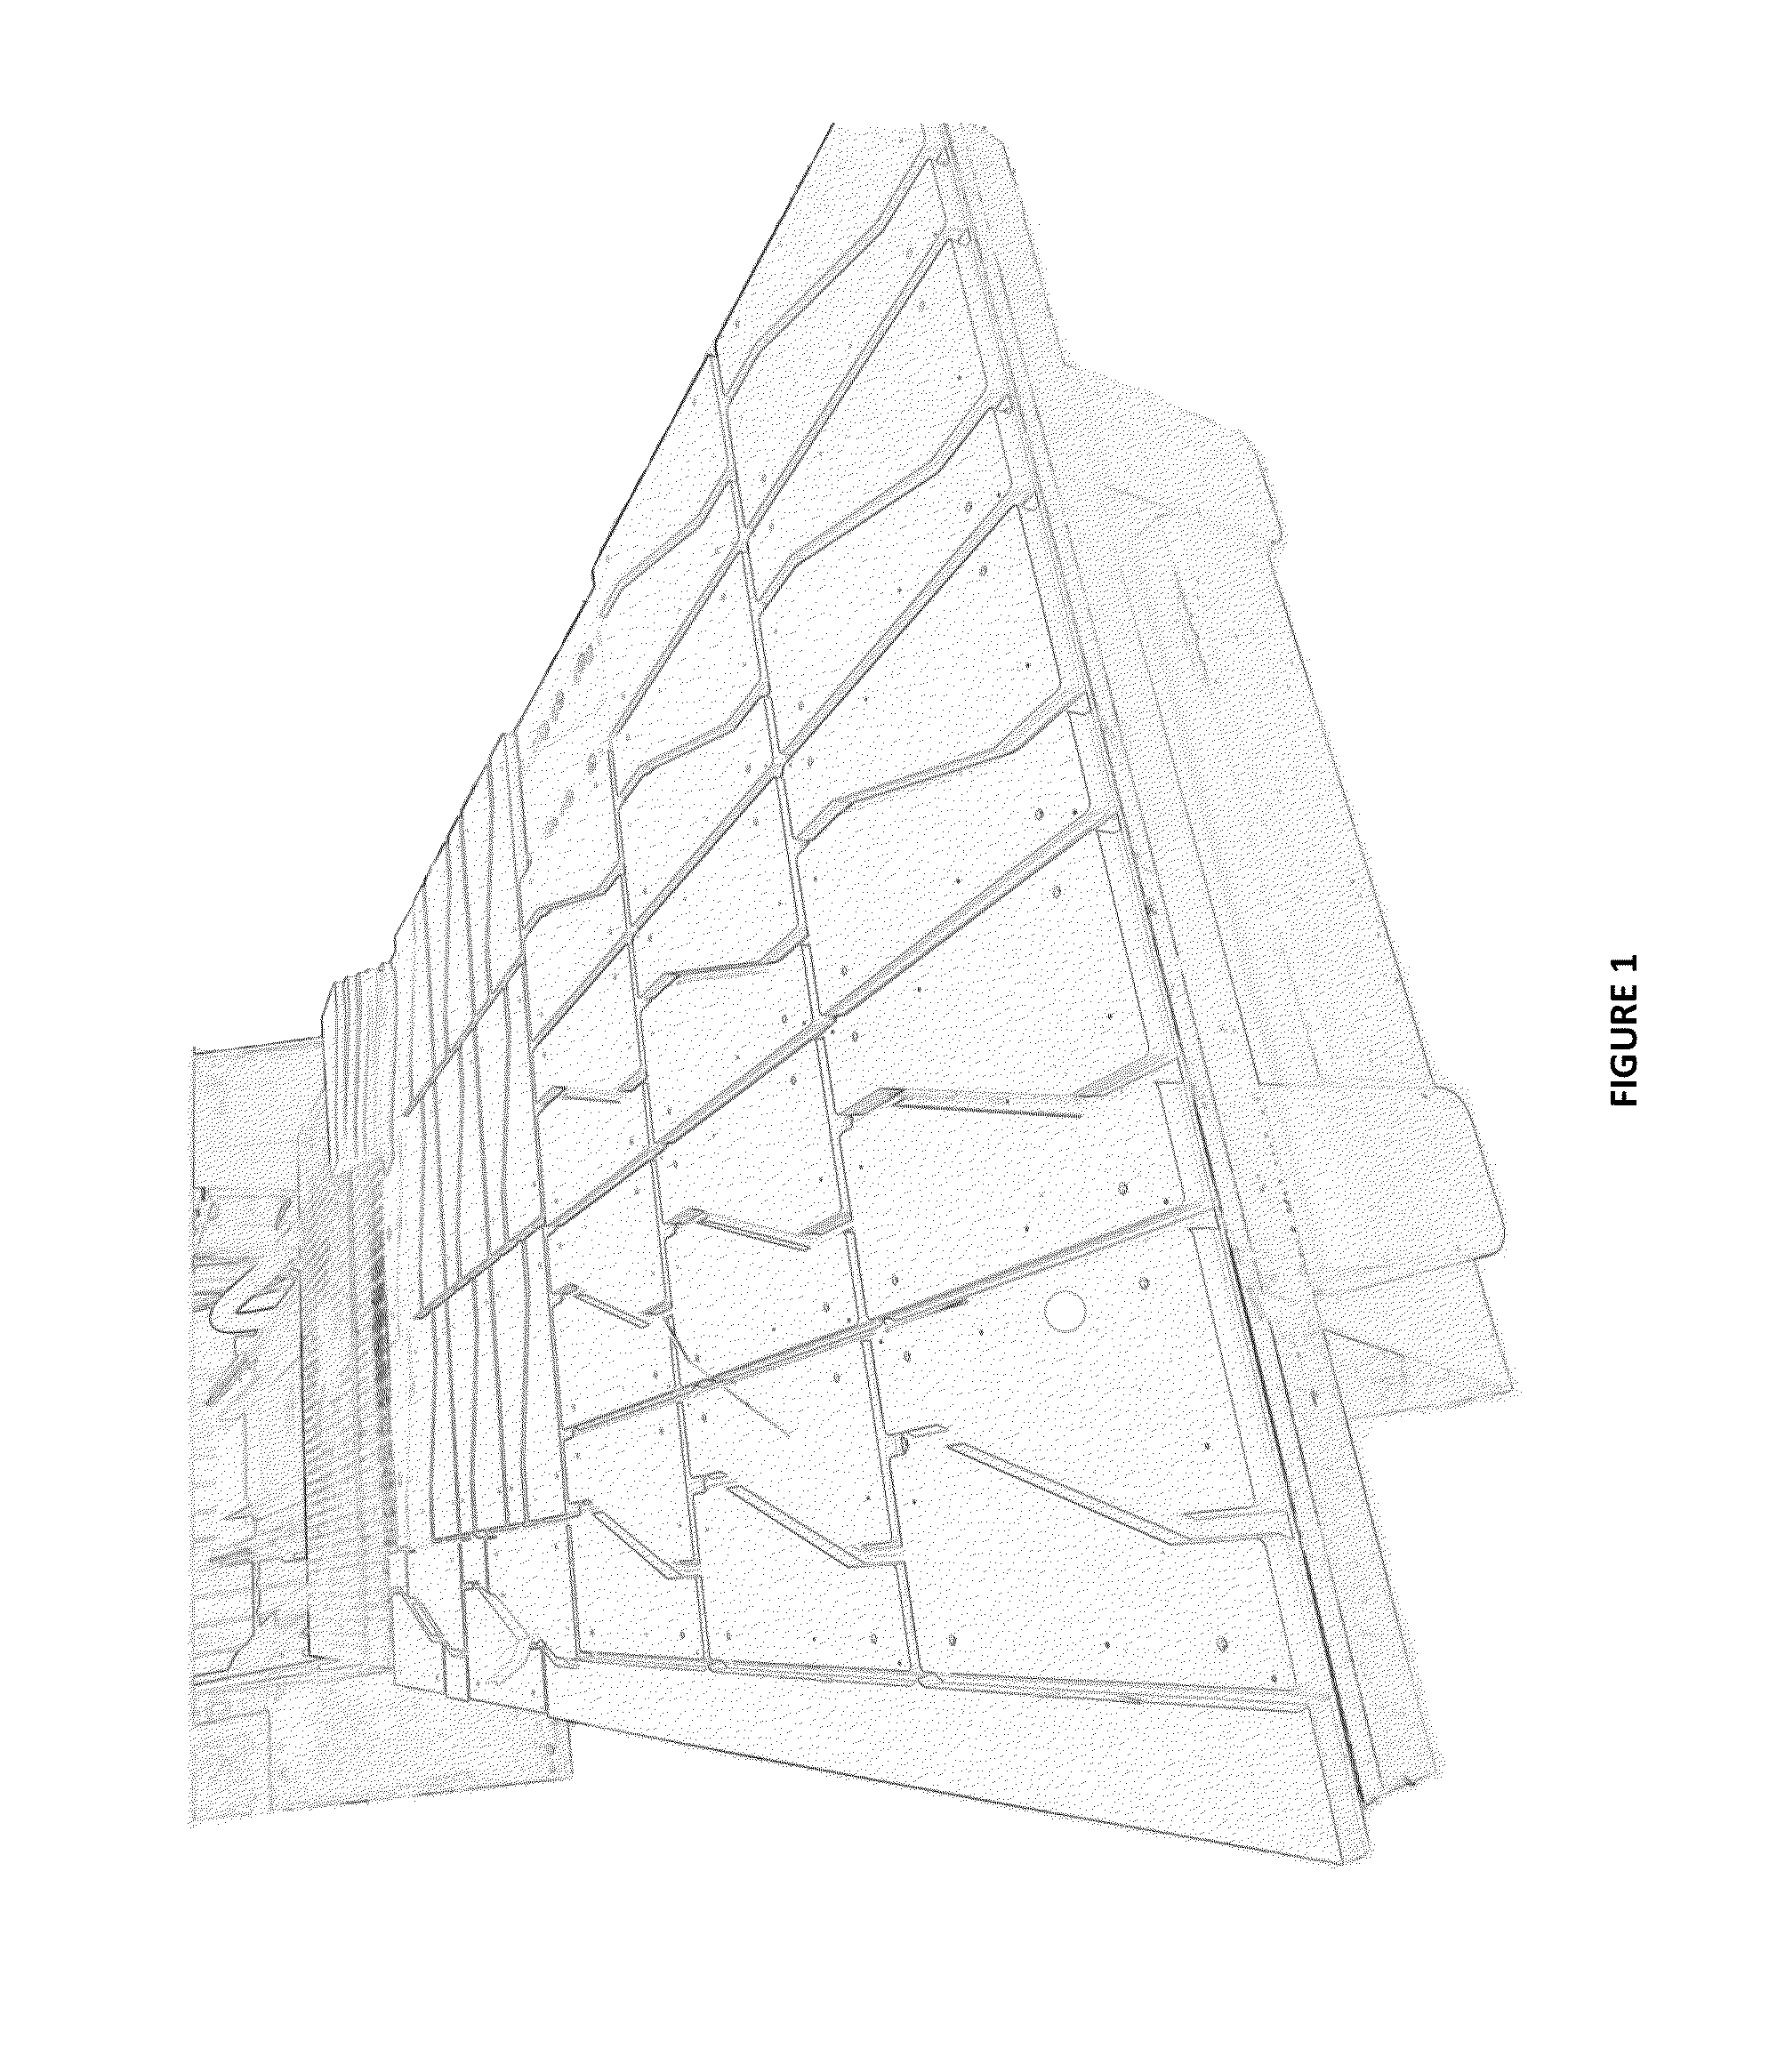 Method for preparing and buffing a powder coated wood substrate